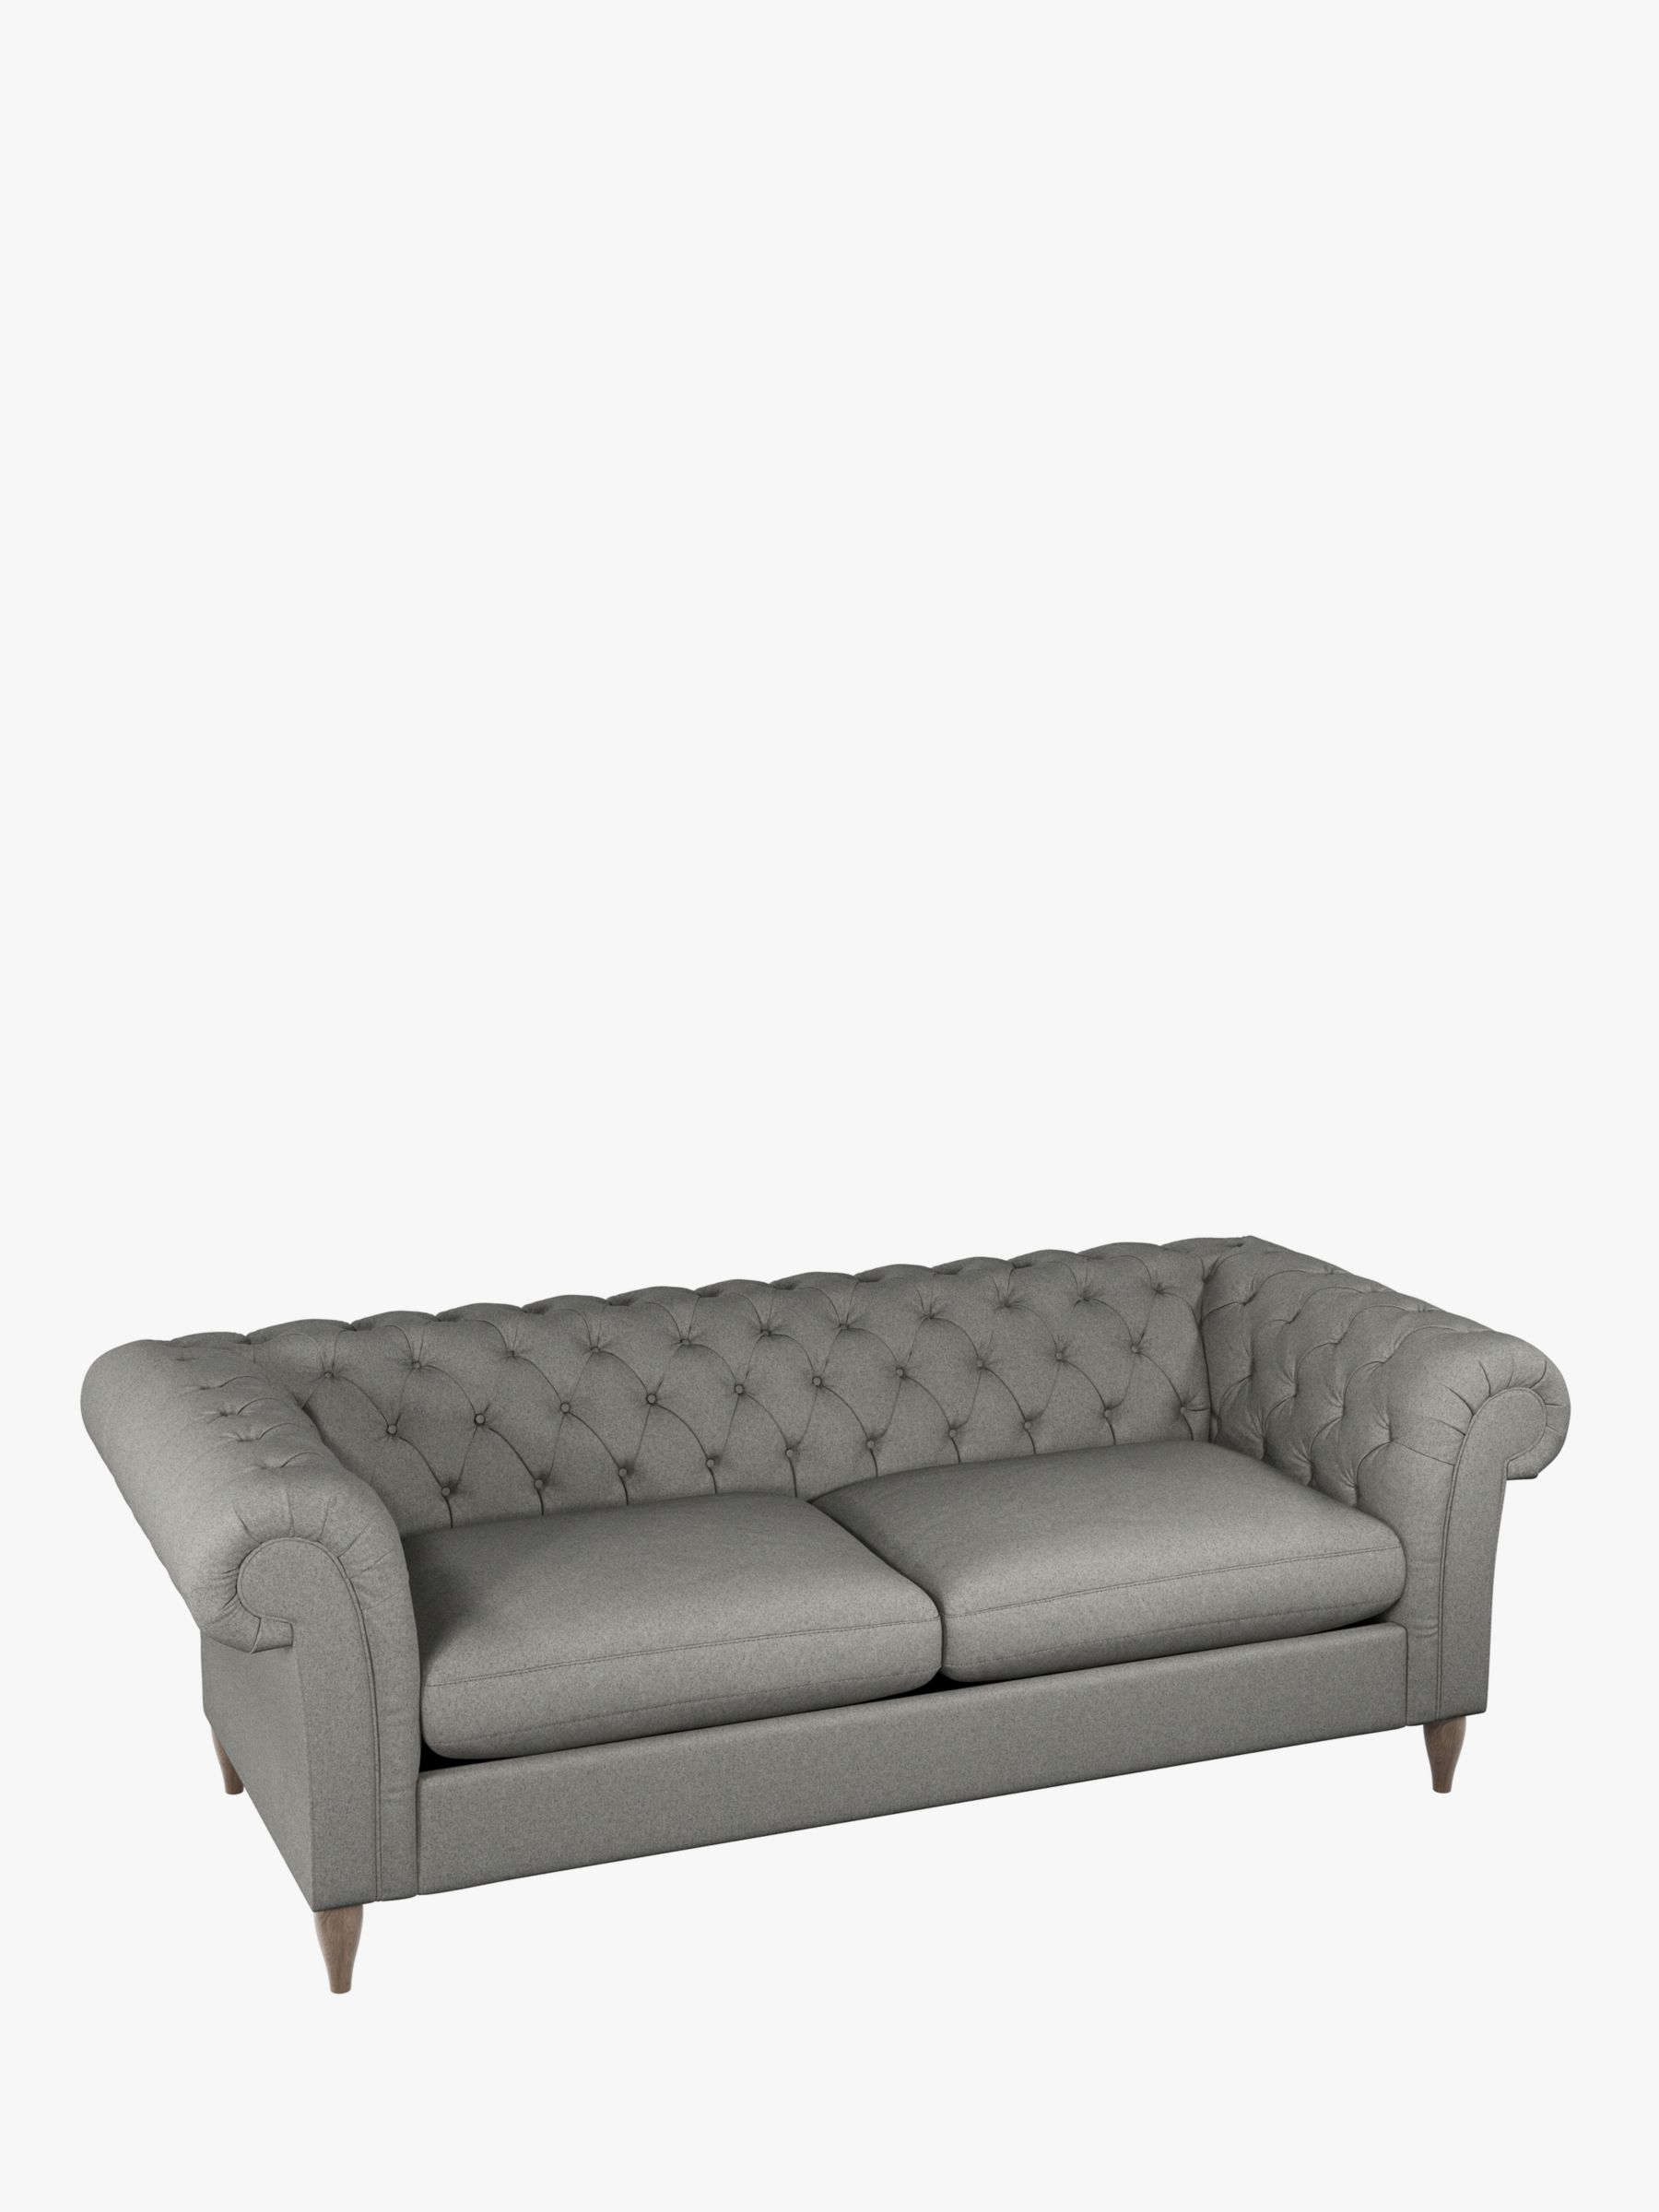 Photo of John lewis cromwell sofa bed